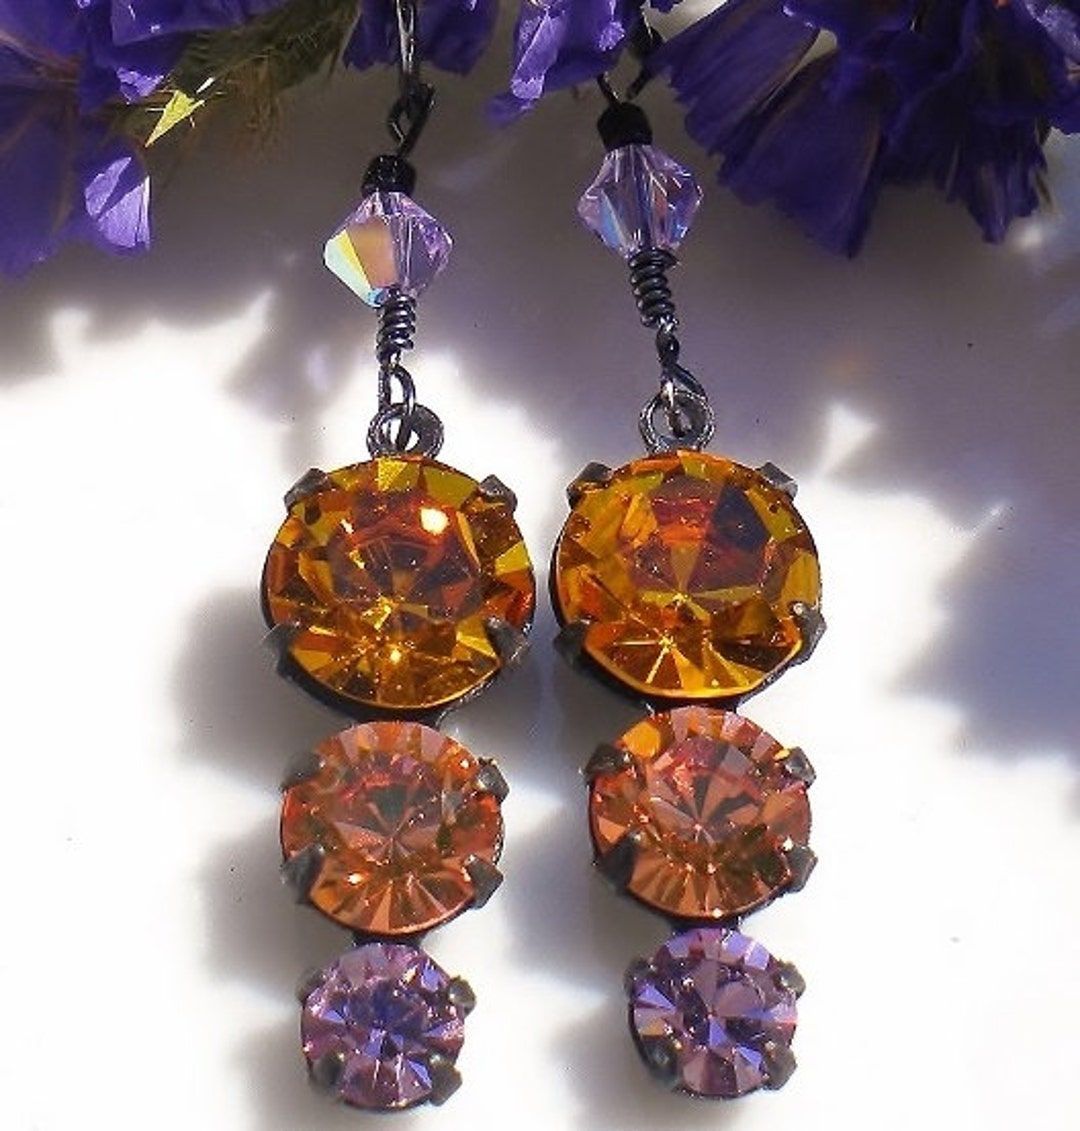 Vintage Topaz Peach Amethyst earrings adorned with Austrian Czech crystals in a stunning design. Add a touch of elegance to your look with these exquisite earrings. ✨ #VintageJewelry #CrystalEarrings #bmecountdown buff.ly/4a0x5Tx